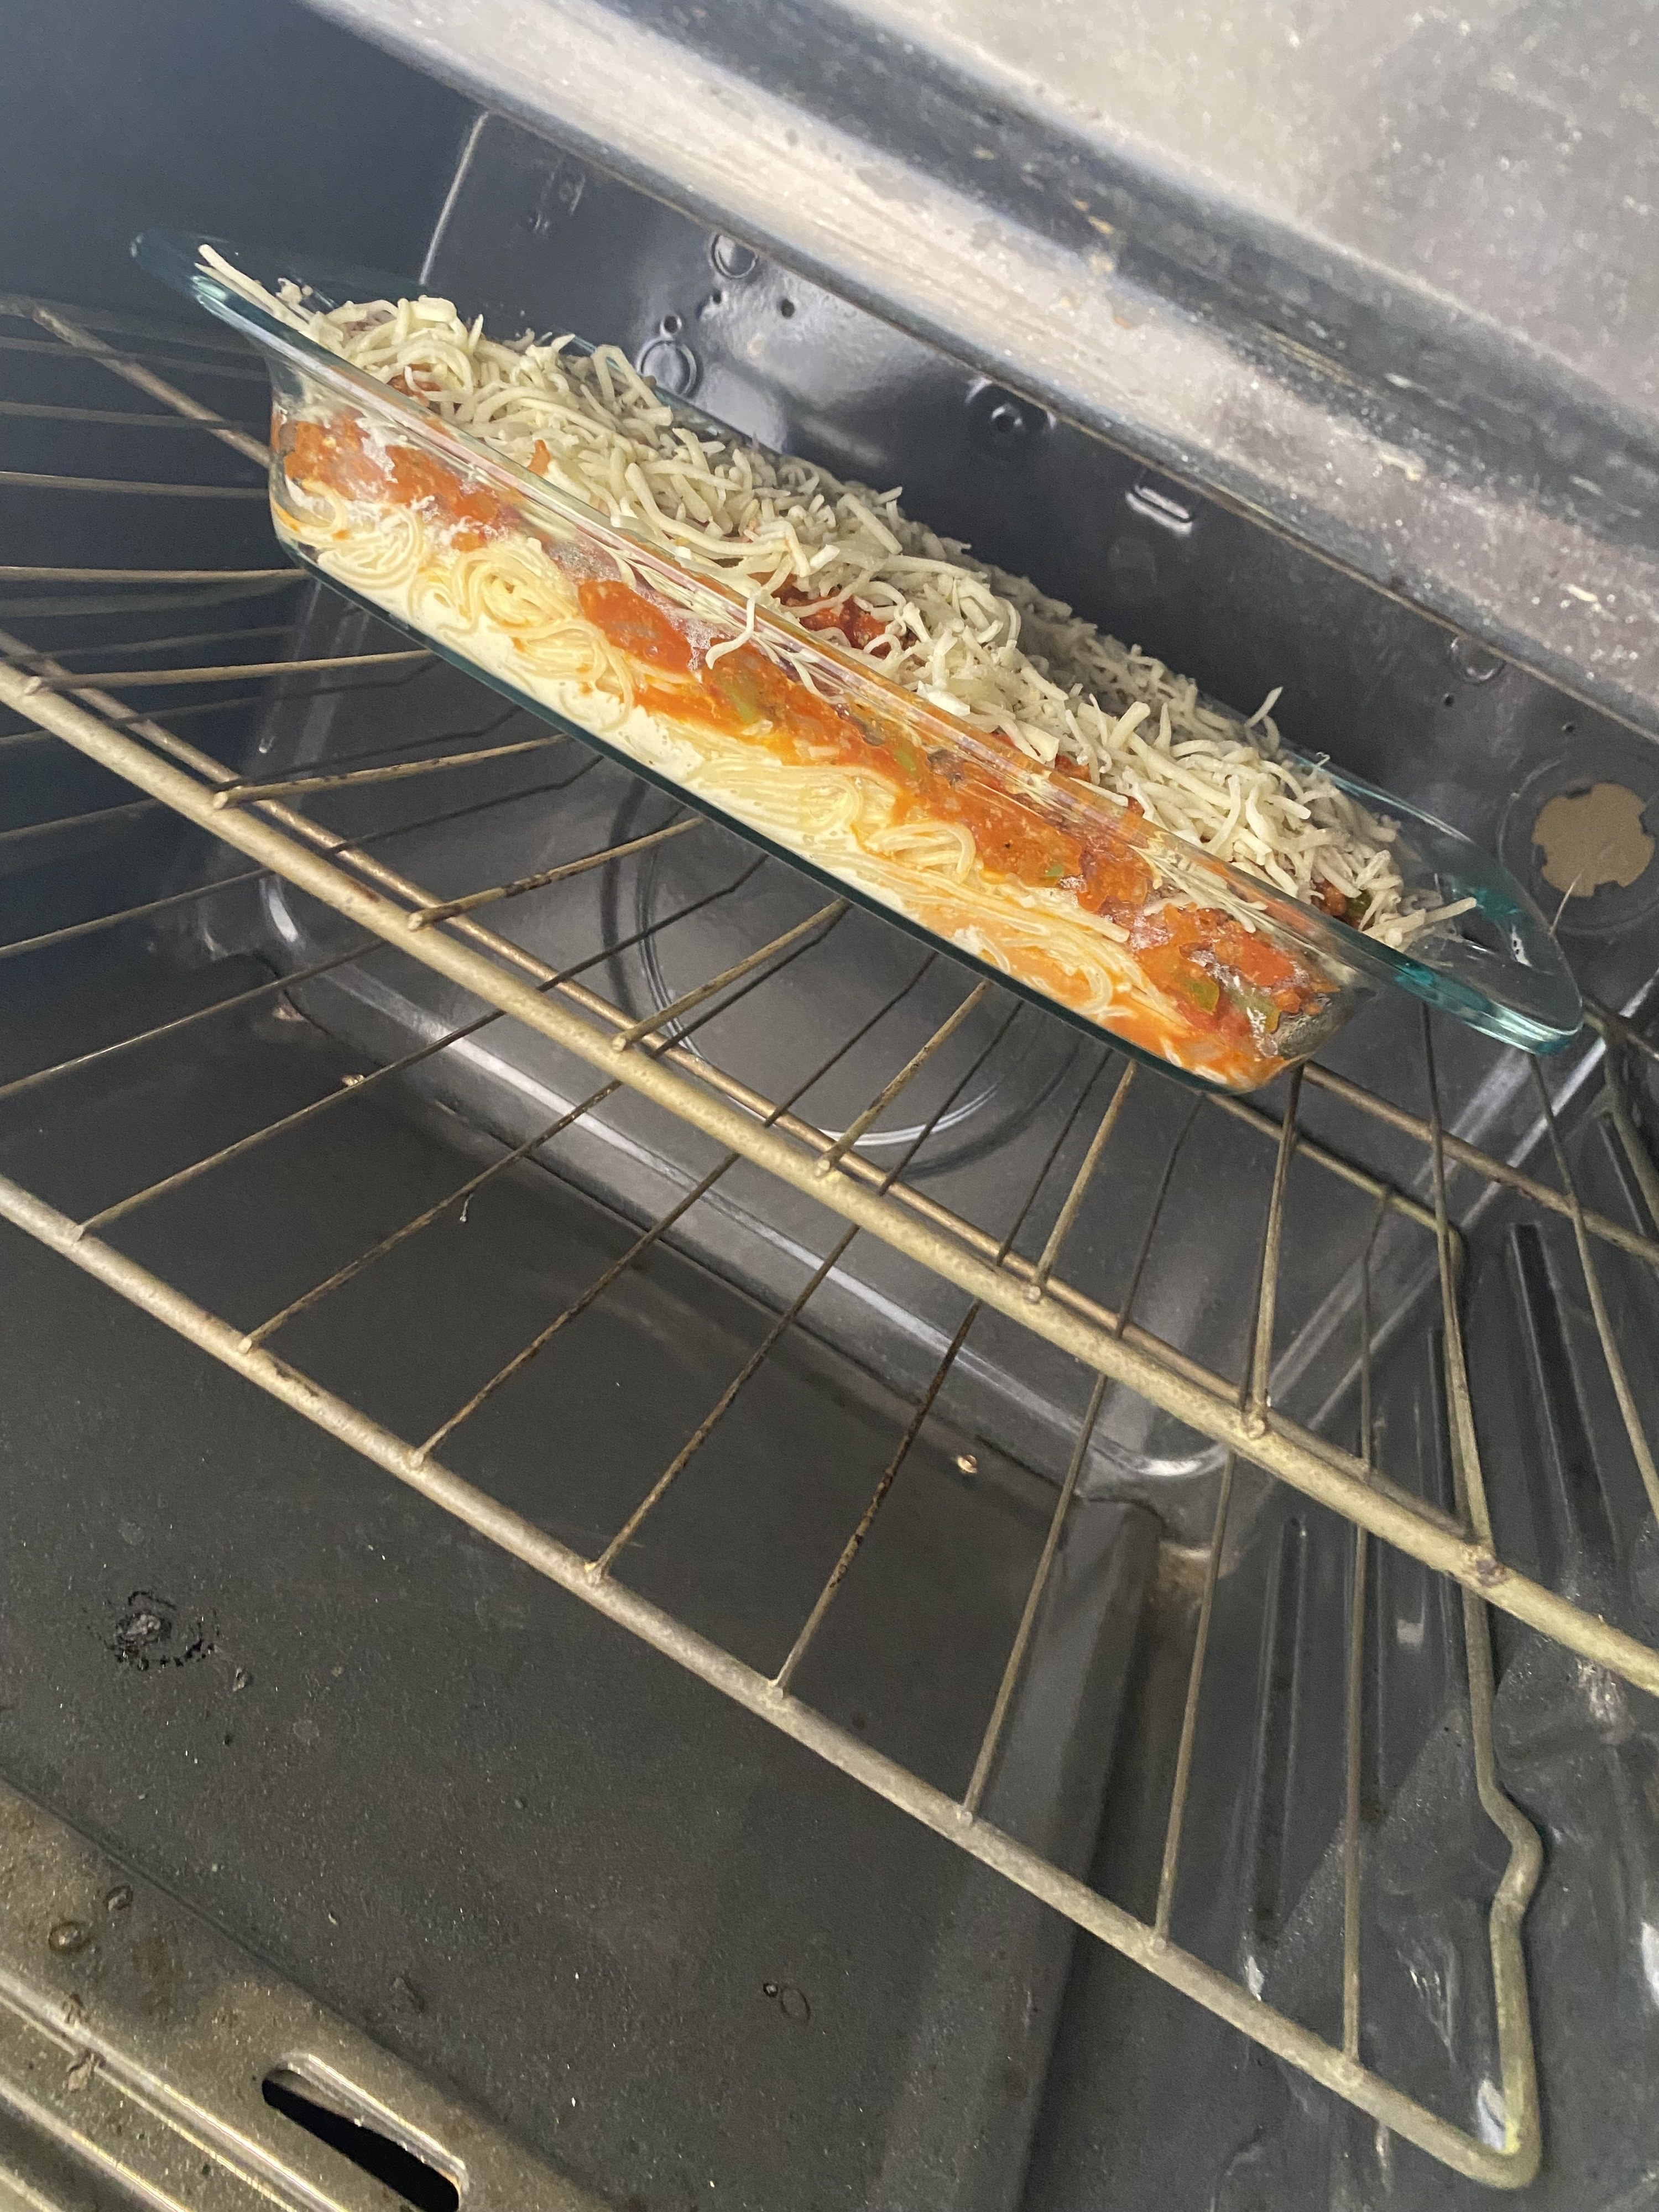 the pasta in the oven